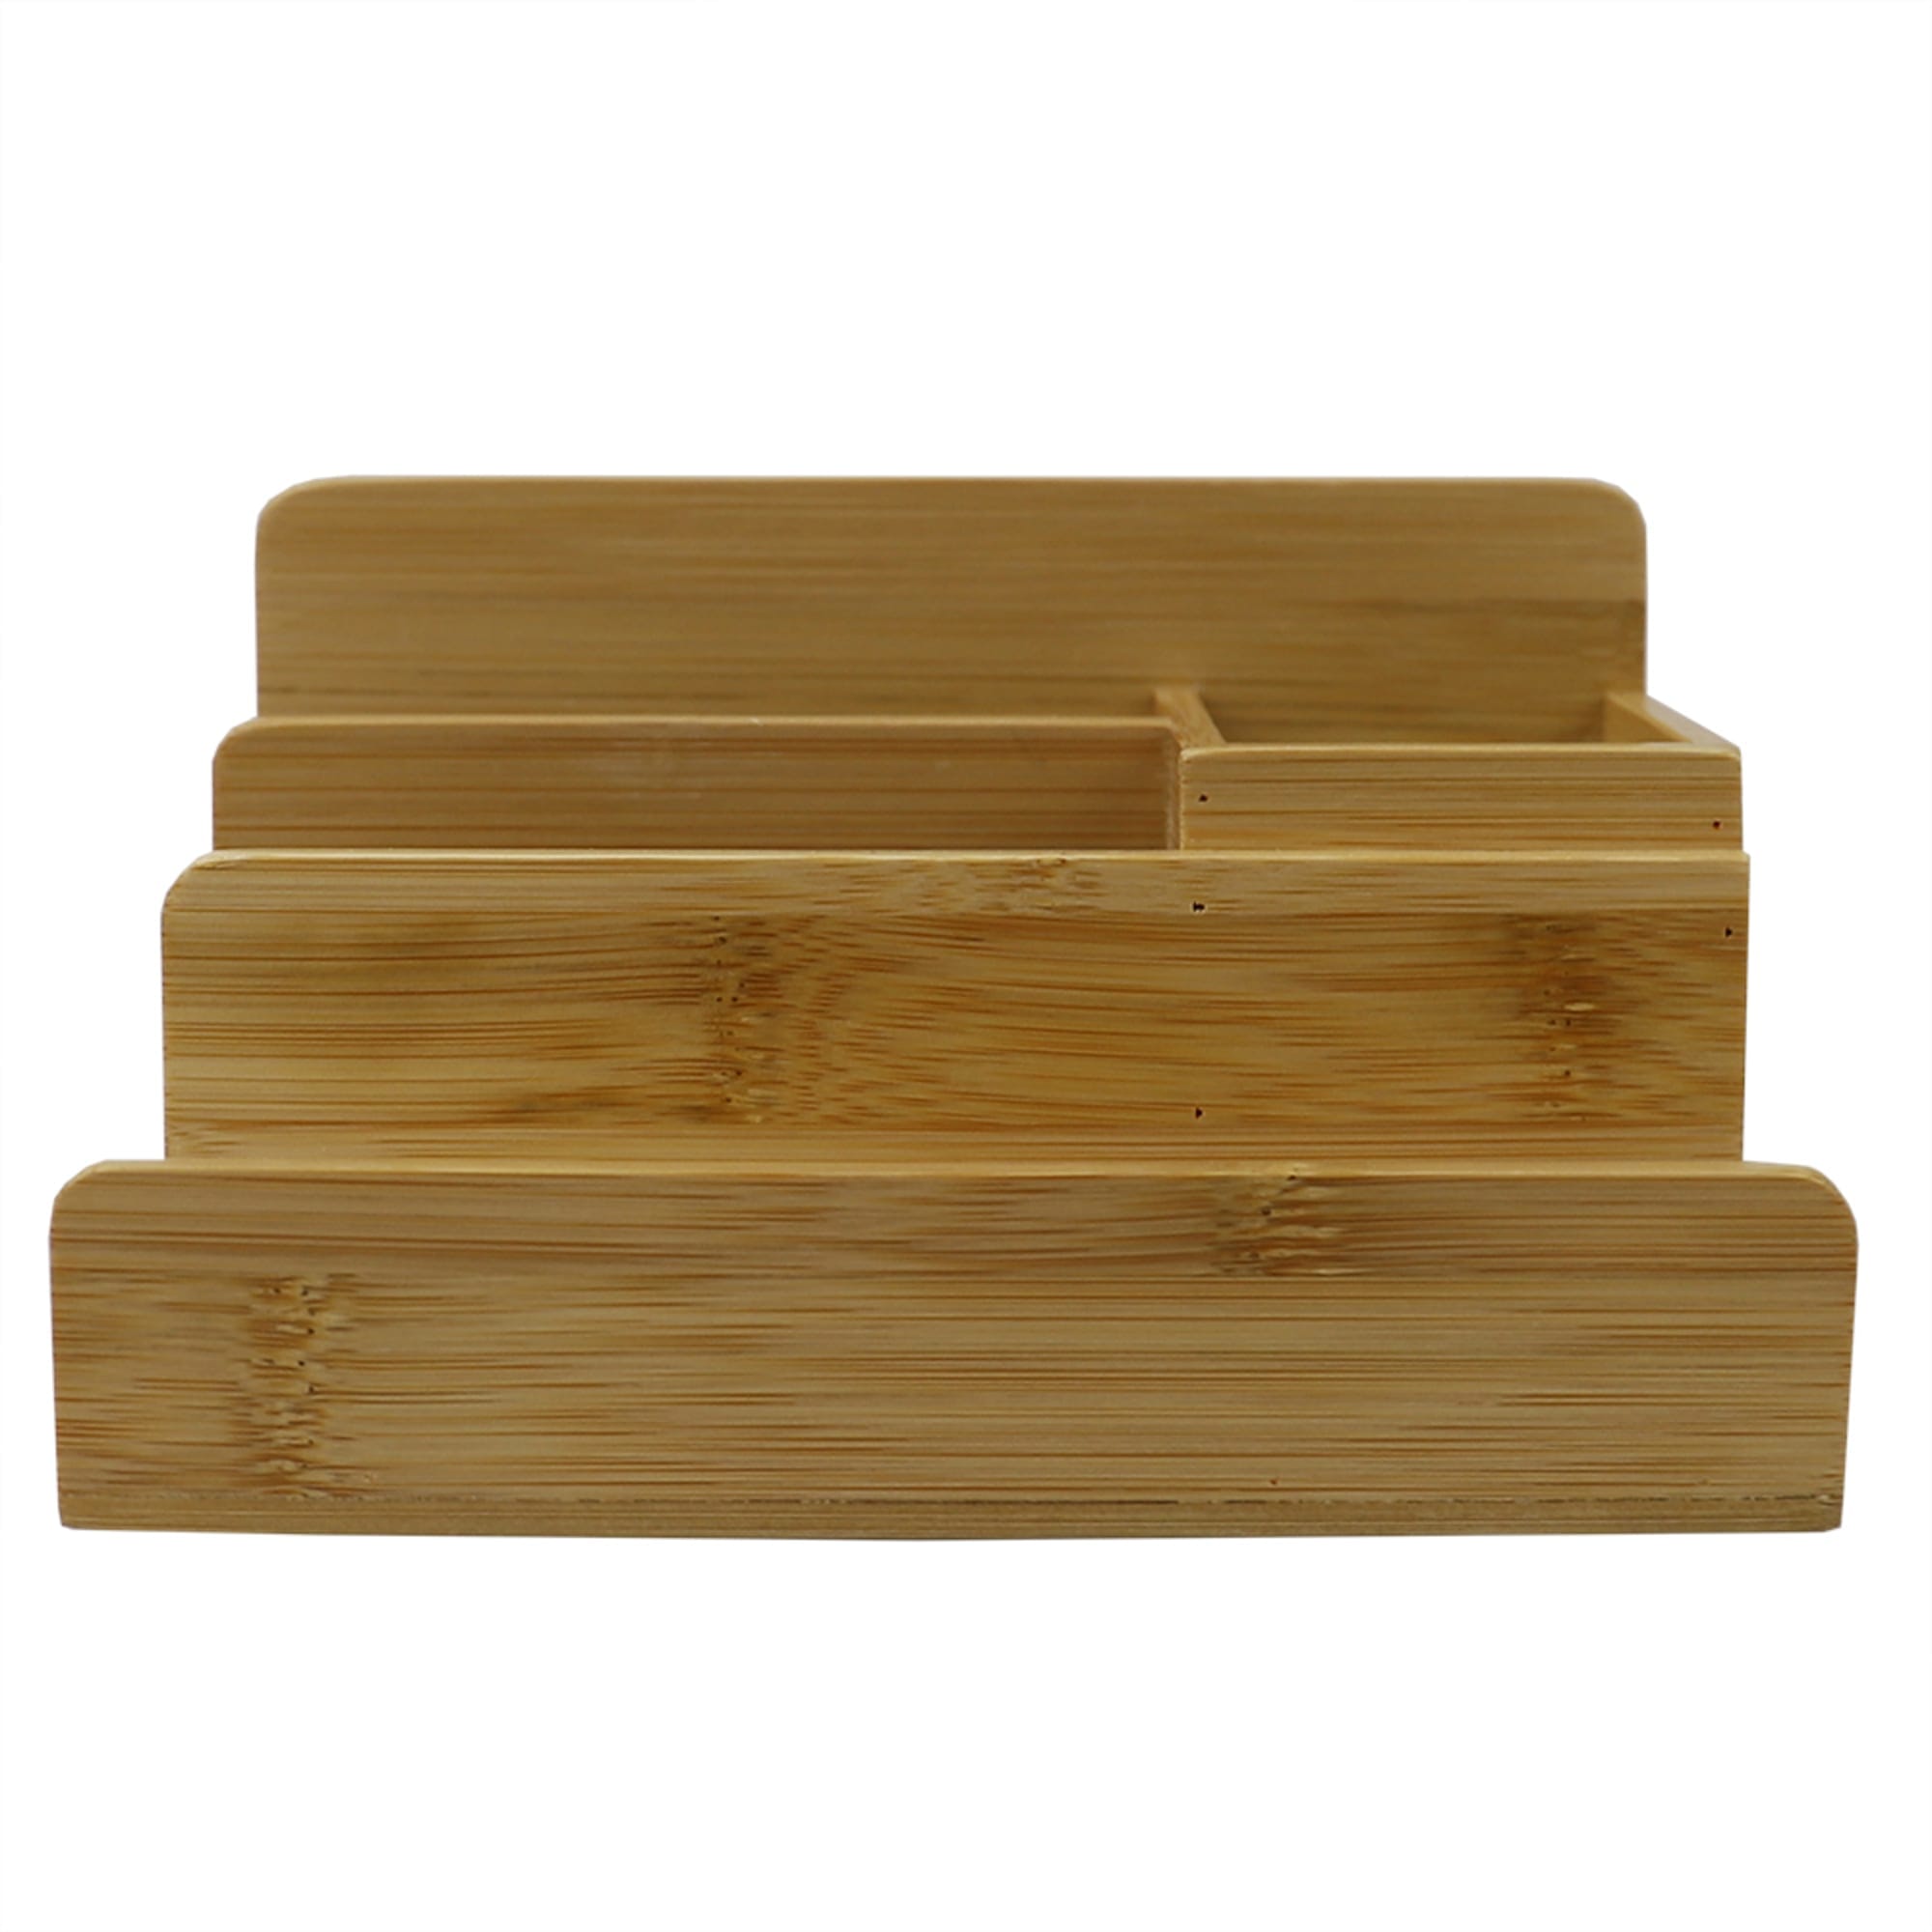 Home Basics 4 Compartment Bamboo Desktop Organizer, Natural $6.00 EACH, CASE PACK OF 6